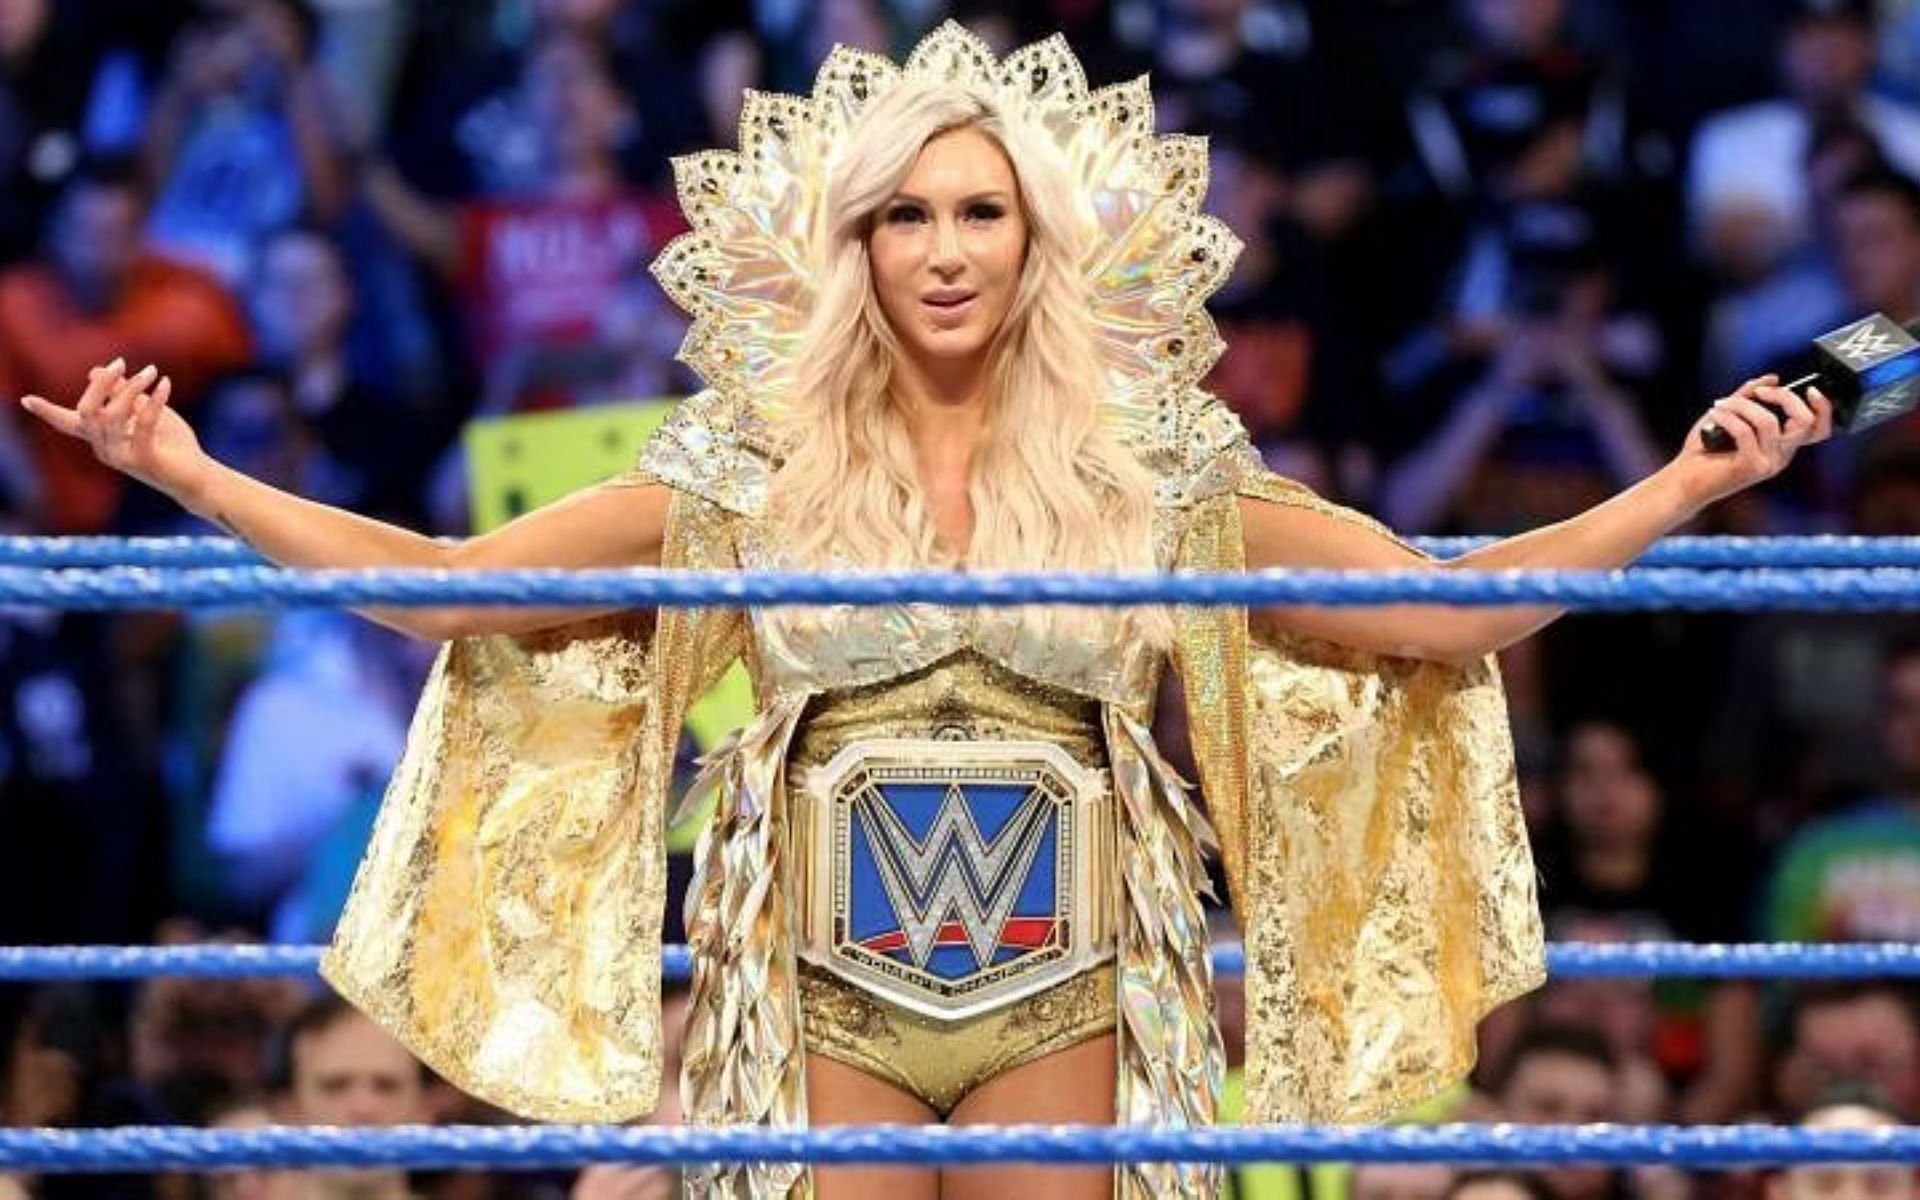 The Queen of professional wrestling, Charlotte.